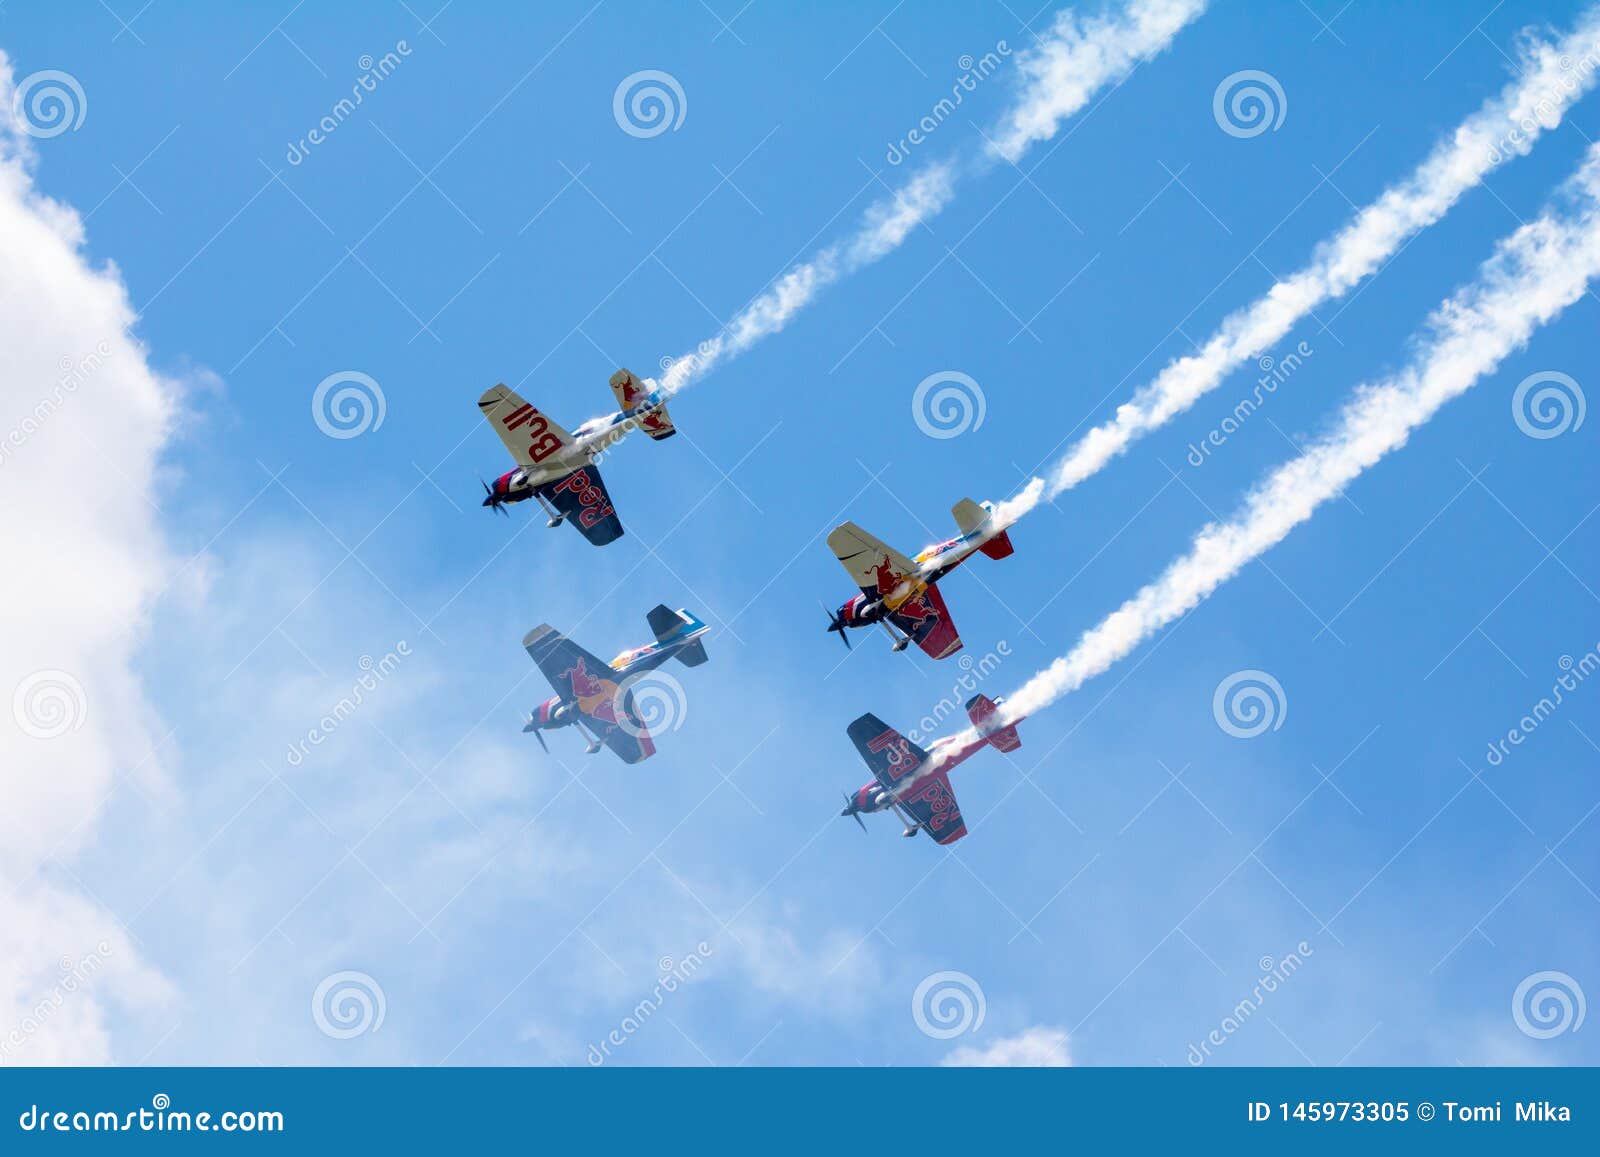 sæt sagtmodighed Emuler Red Bull Air Race World Championship 2018 Editorial Image - Image of event,  race: 145973305